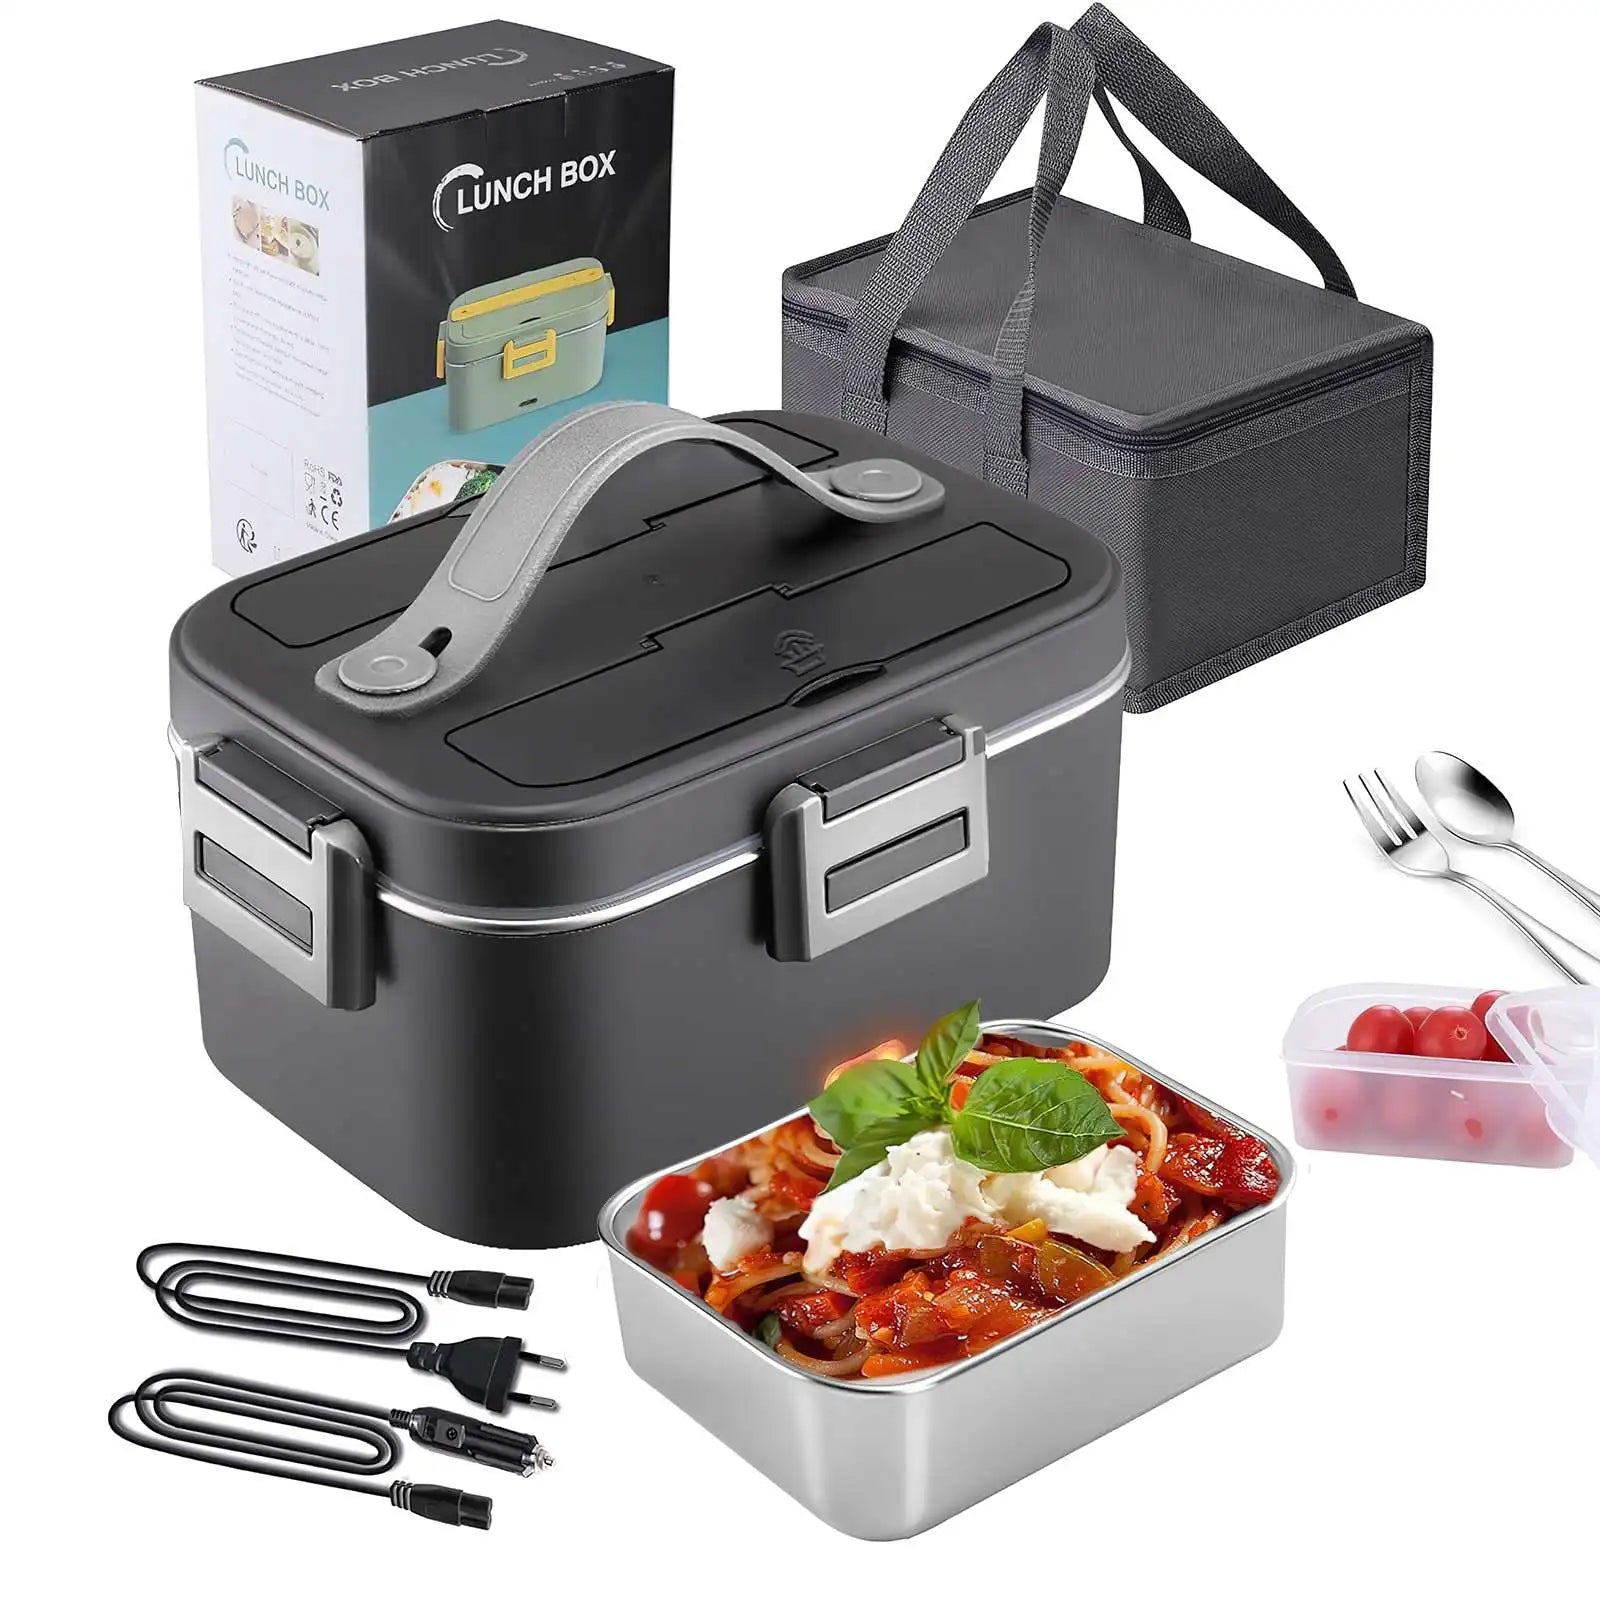 Portable Electric Heated Lunch Box 75W Stainless Steel Detachable 1.8L Heating Bowl Car/Truck/Office Dining Box Microwave Oven